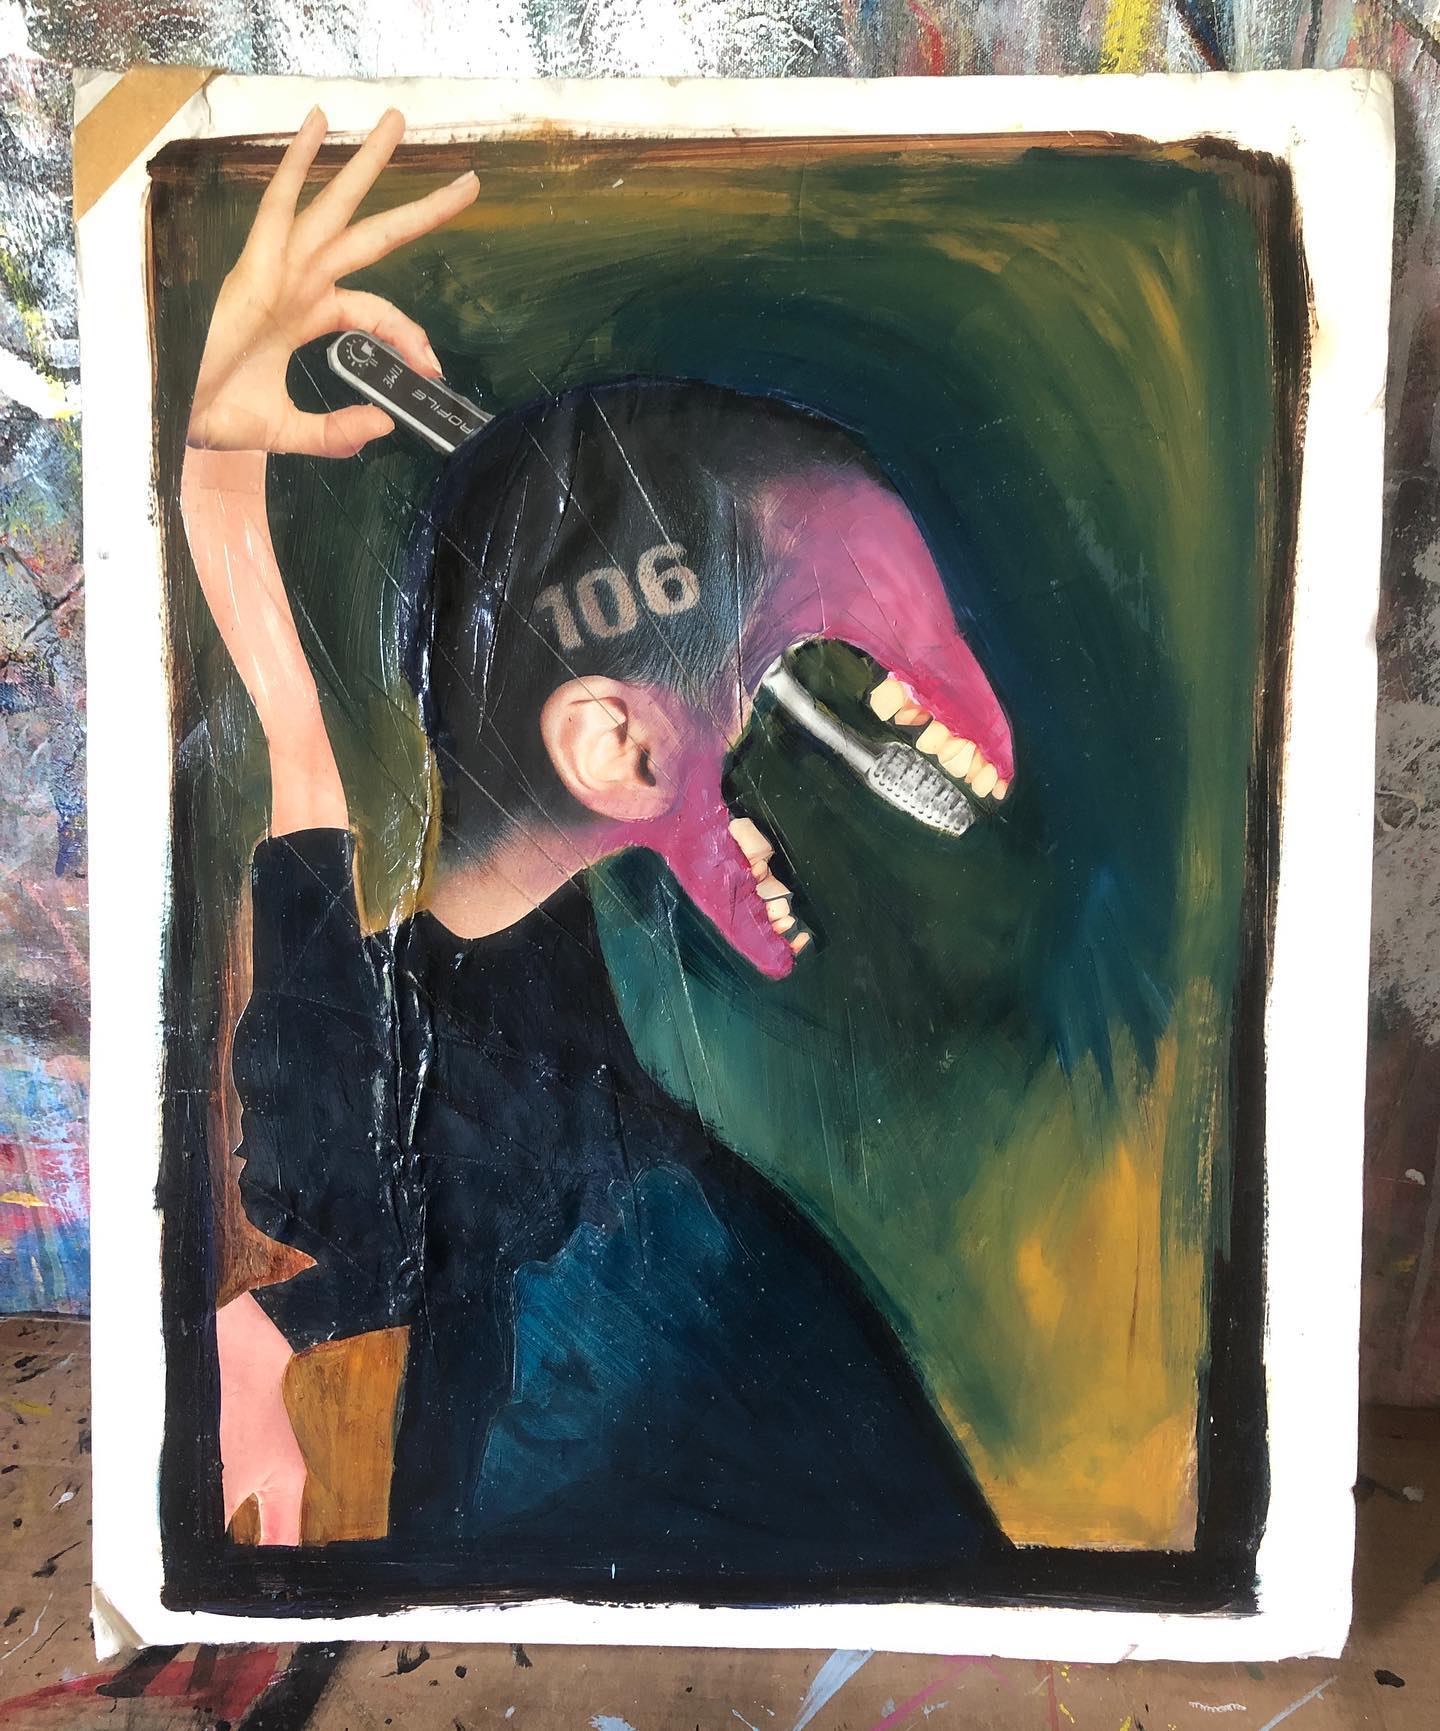 Importance of Dental Hygiene - Collage/Painting from 1999